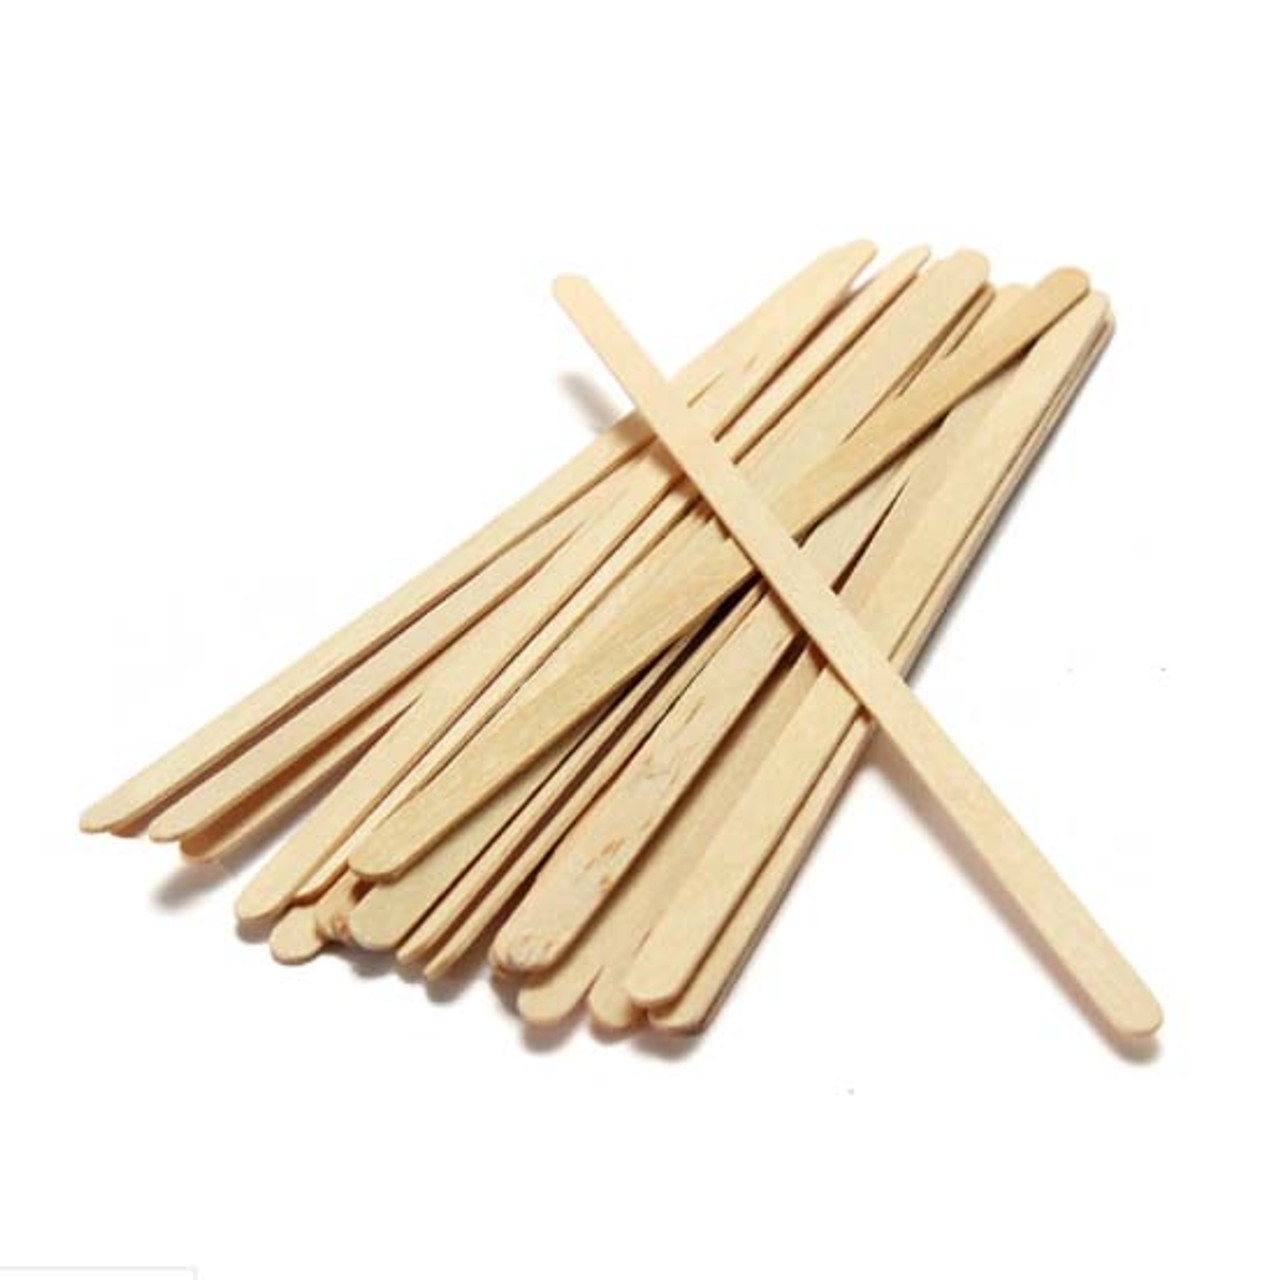 https://cdn11.bigcommerce.com/s-tjx0gy7pkp/images/stencil/1280x1280/products/16288/27919/wooden_coffee_stirrers_180_mm_7_inch__89243.1645104585.jpg?c=2